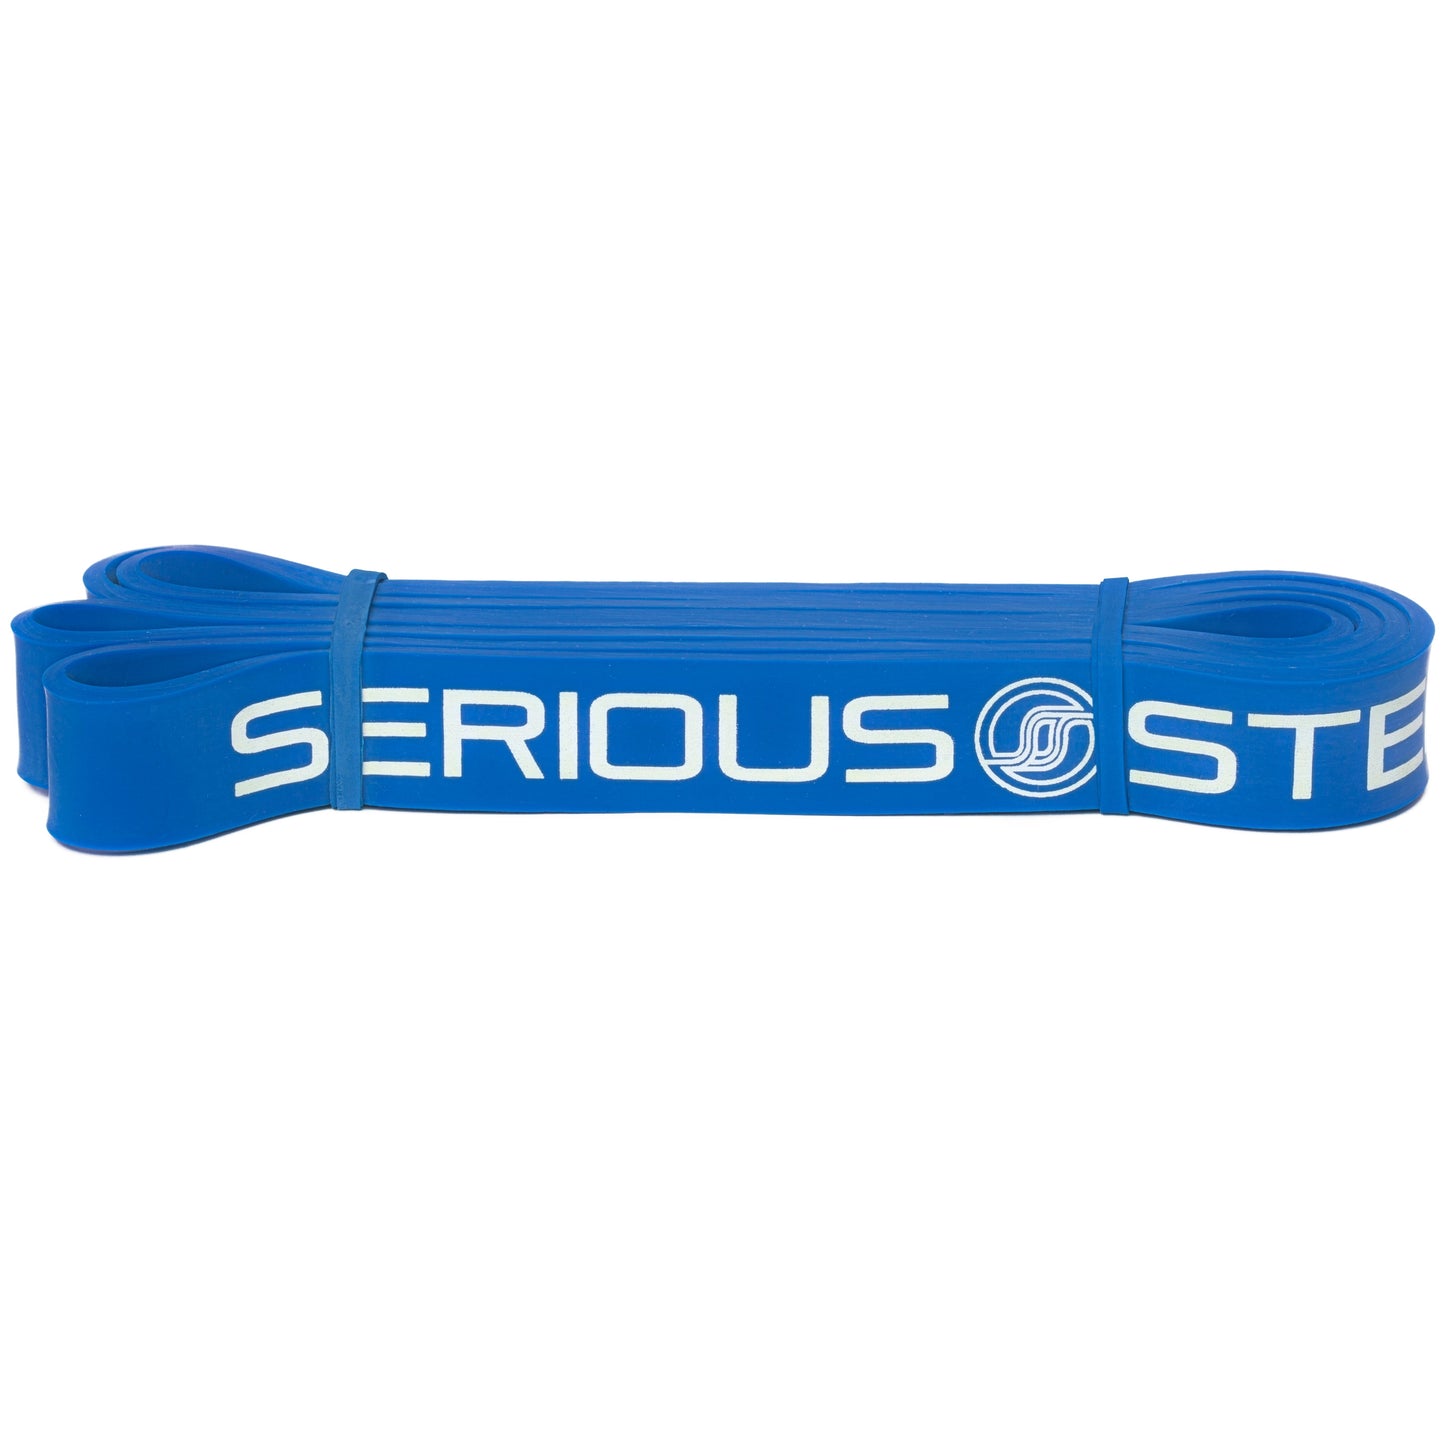 41" X-Strong Resistance Band